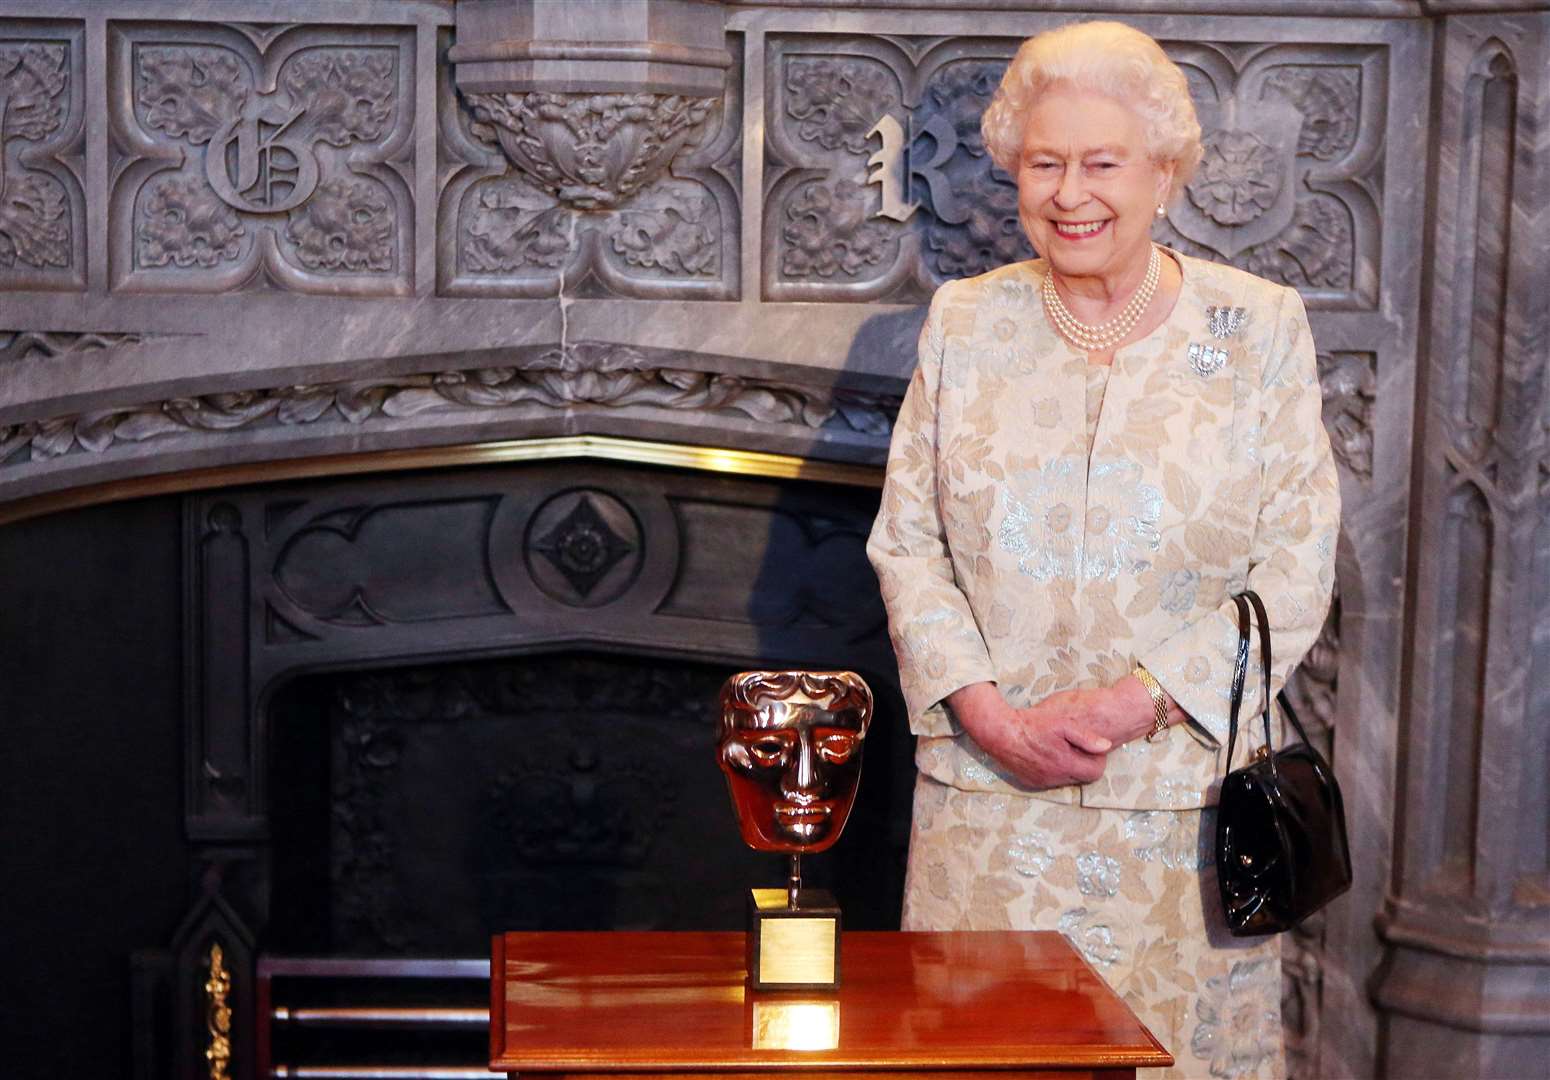 Queen Elizabeth II receives an honorary Bafta in recognition of a lifetime’s support of British film and television at Windsor Castle (Steve Parsons/PA)